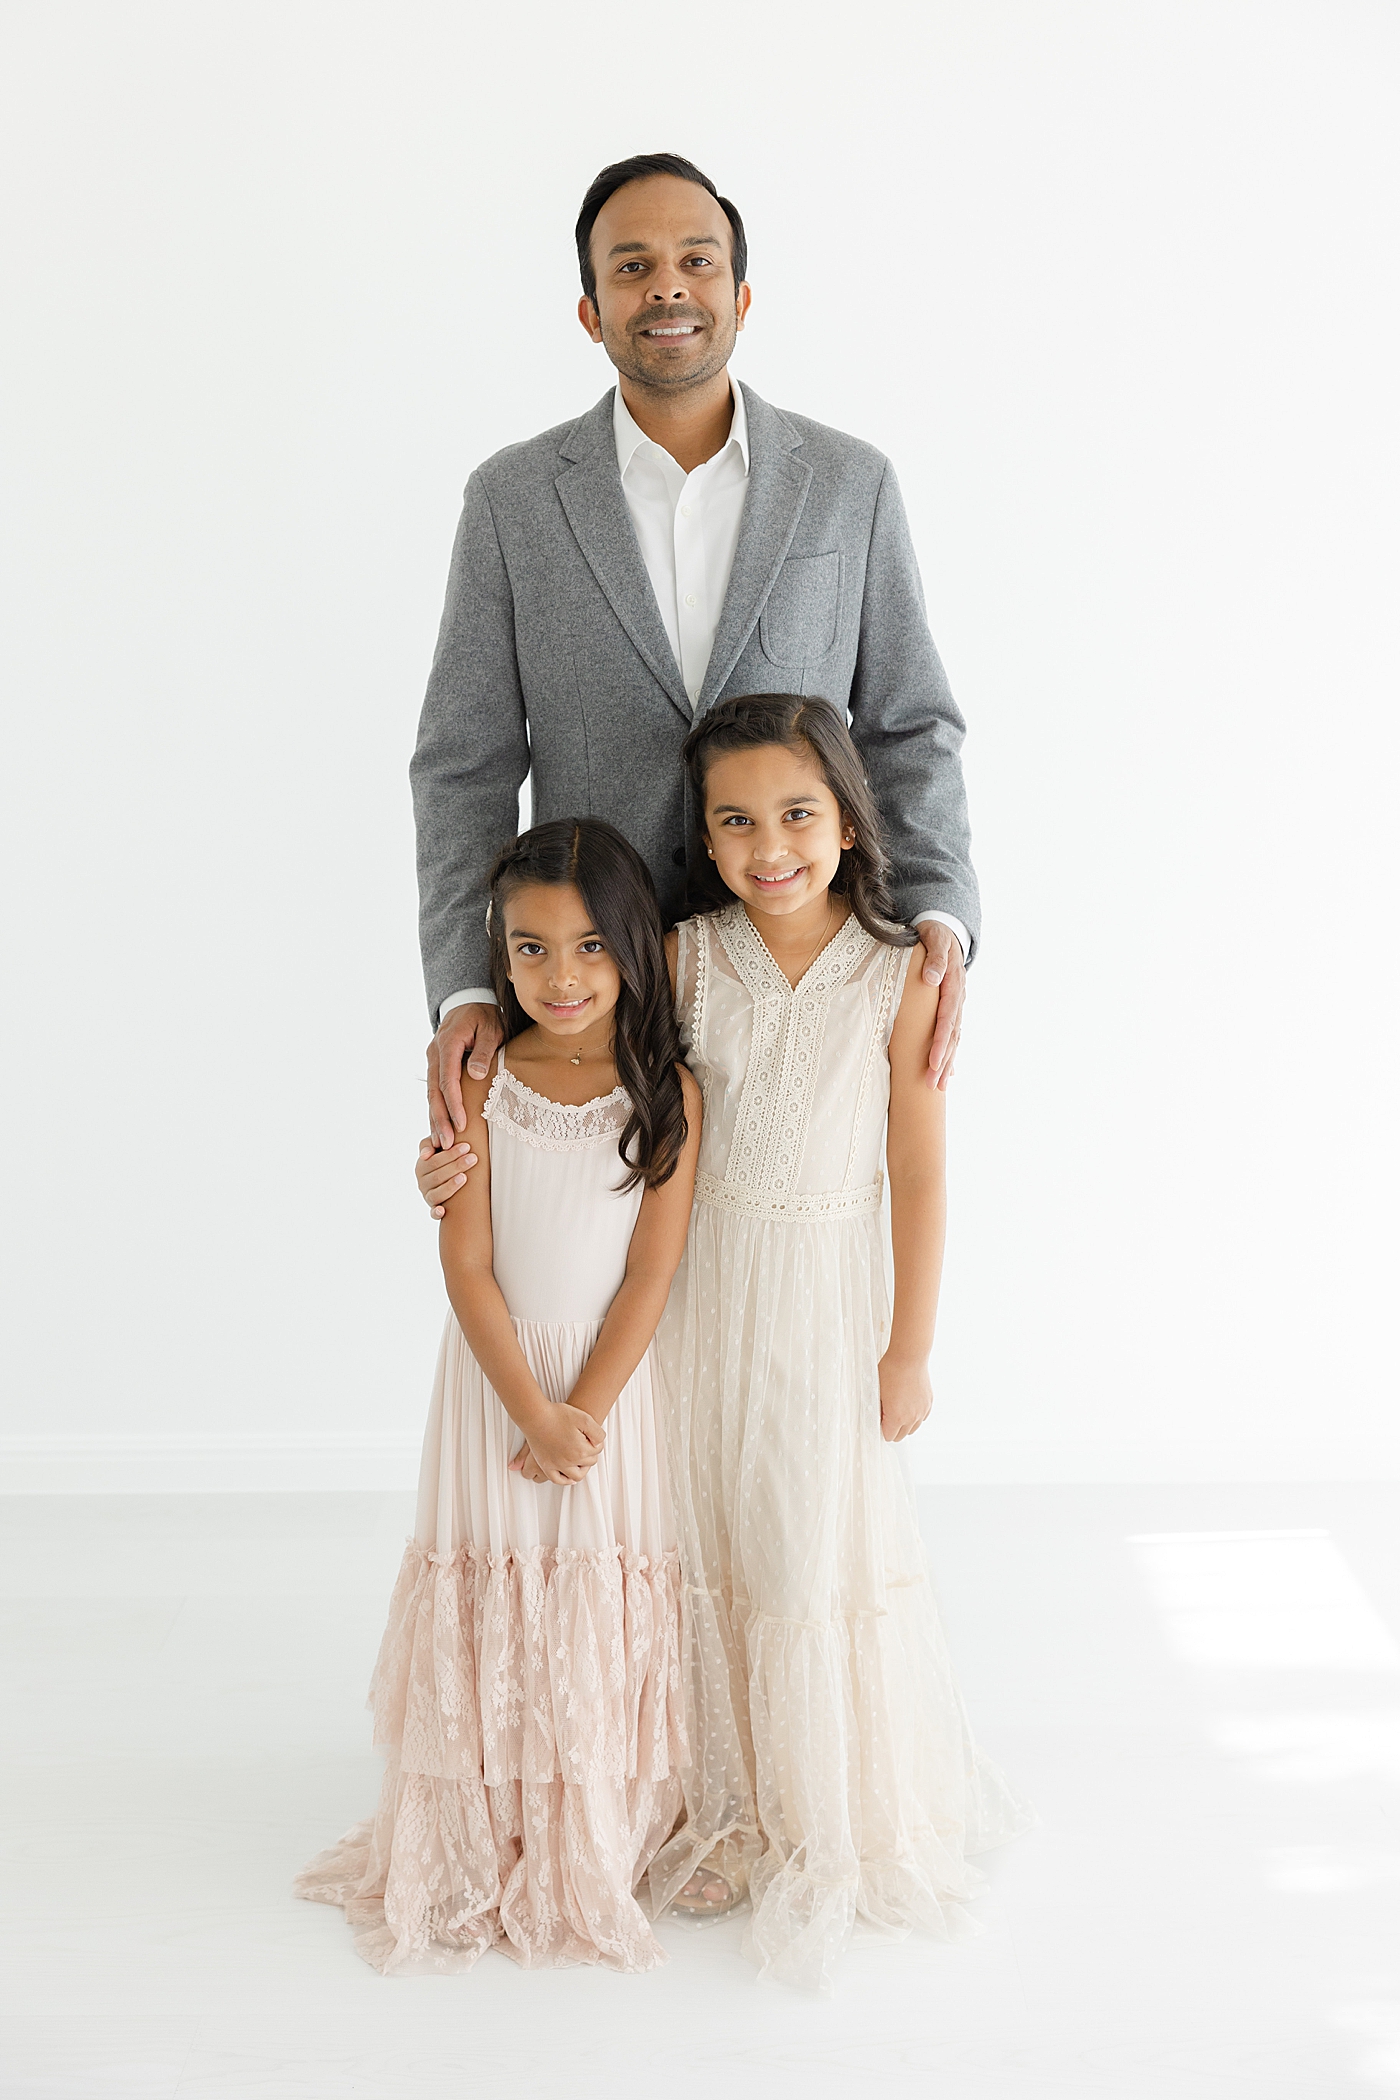 Dad posing with his two daughters in the studio | Image by Sana Ahmed Photography